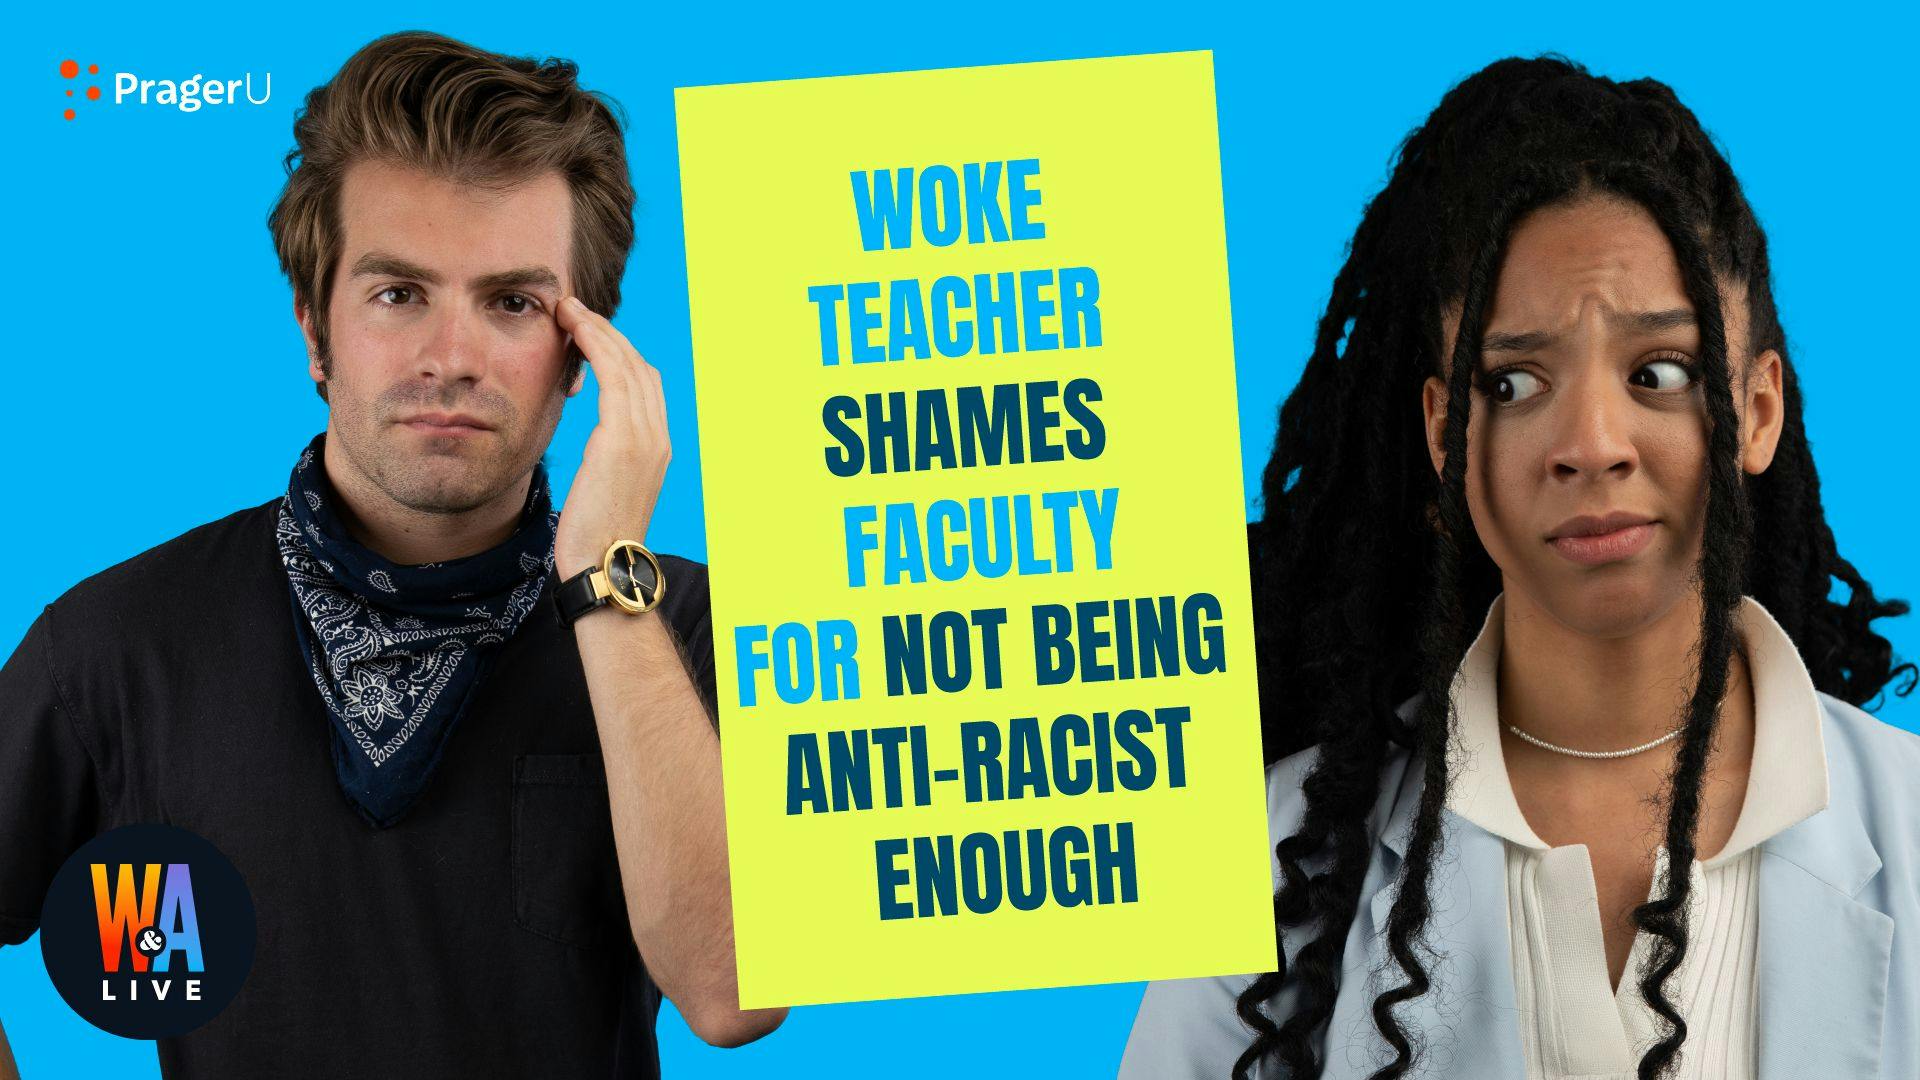 Woke Teacher Shames Faculty for Not Being Anti-Racist Enough